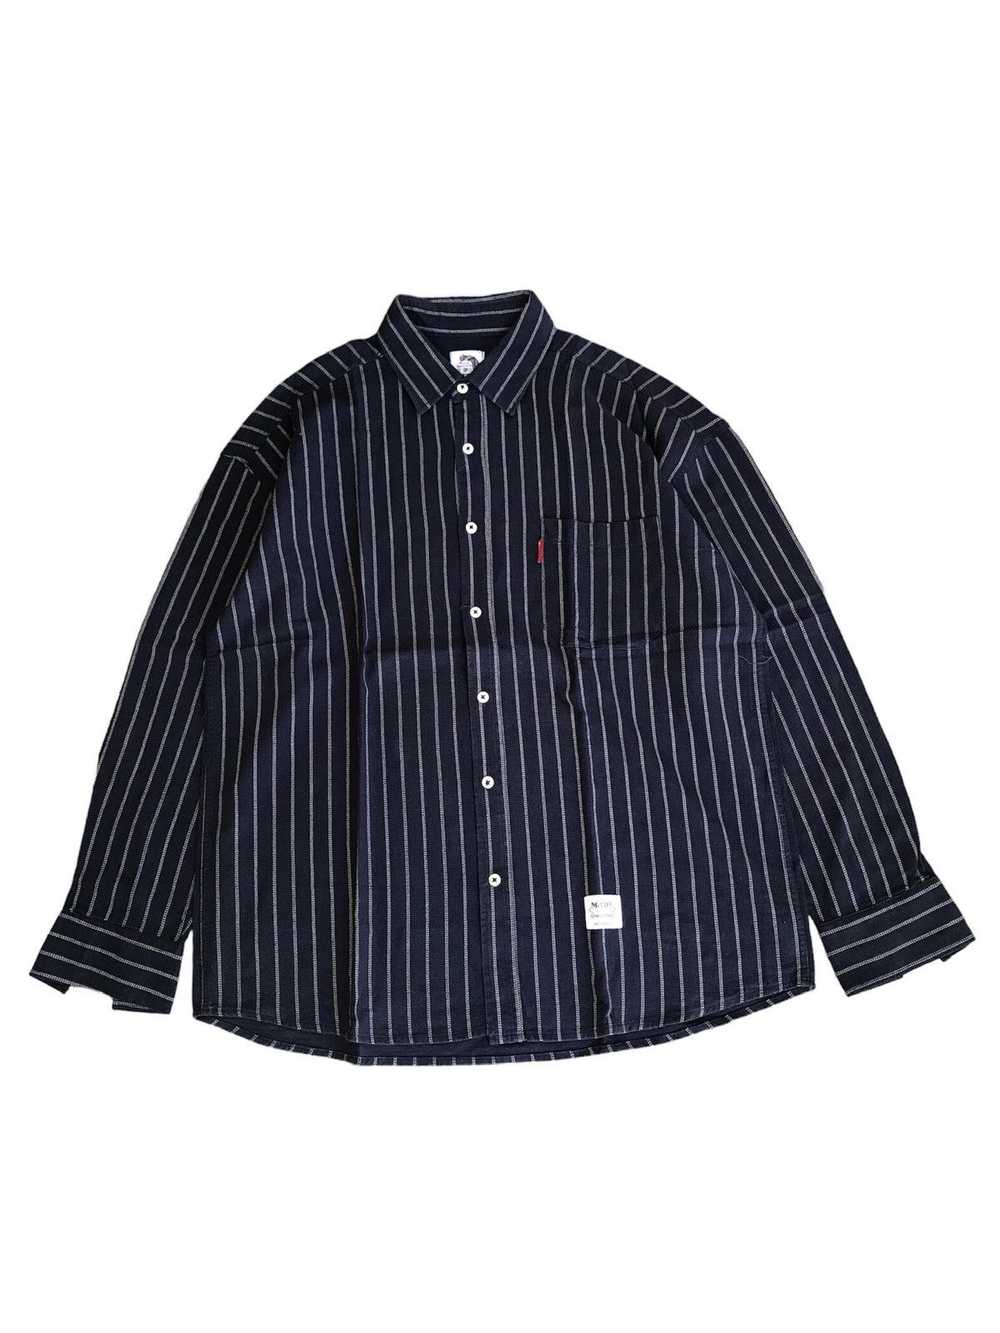 Japanese Brand × The Real McCoy's × Union Made th… - image 1